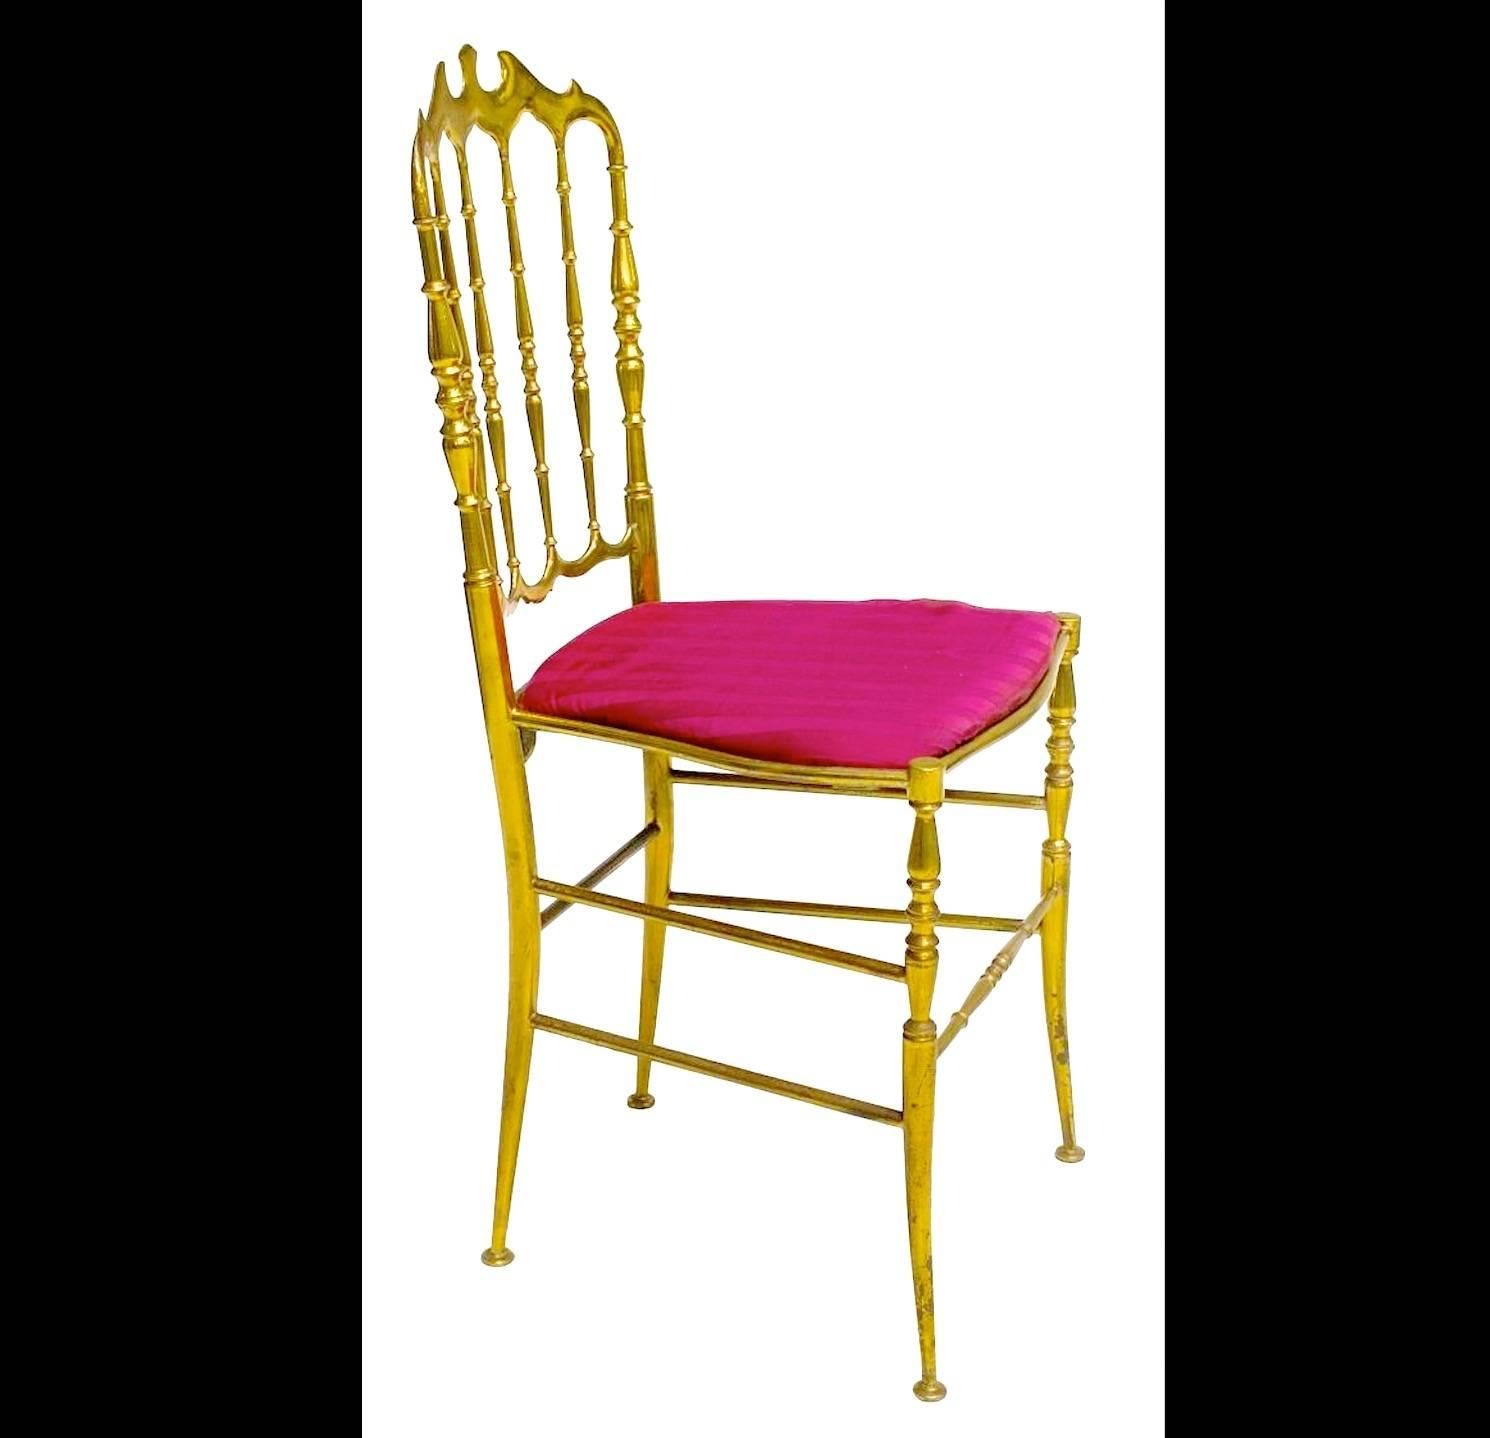 Pair of solid brass Chiavari ballroom chairs, Italy, c. 1960 with gilt brass frame, red upholstered seat, over tapered legs joined by brass stretchers.

This is the gold standard in chic! Solid polished brass 1960's Chiavari chairs with dainty splay